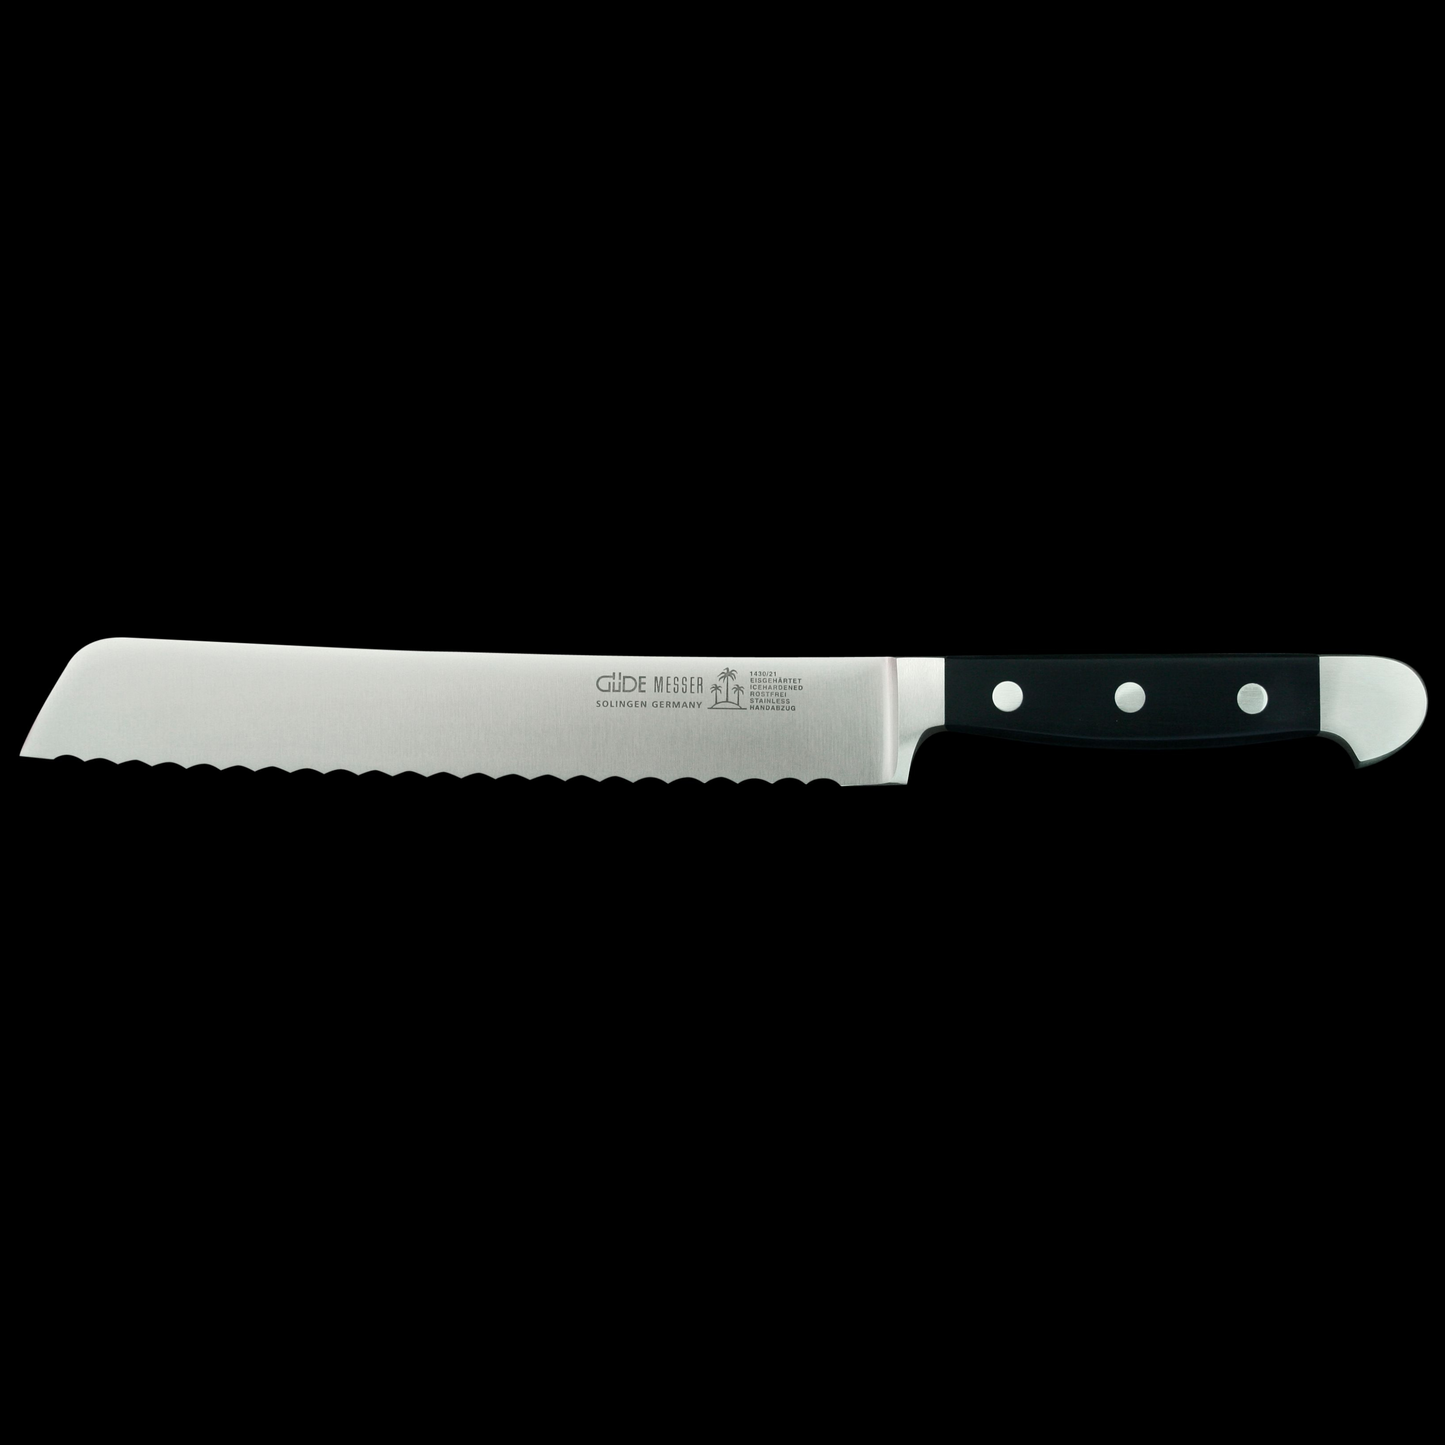 Gude Alpha Series Forged Double Bolster Bread Knife 8", Black Hostaform Handle and Serrated Blade - GuedeUSA